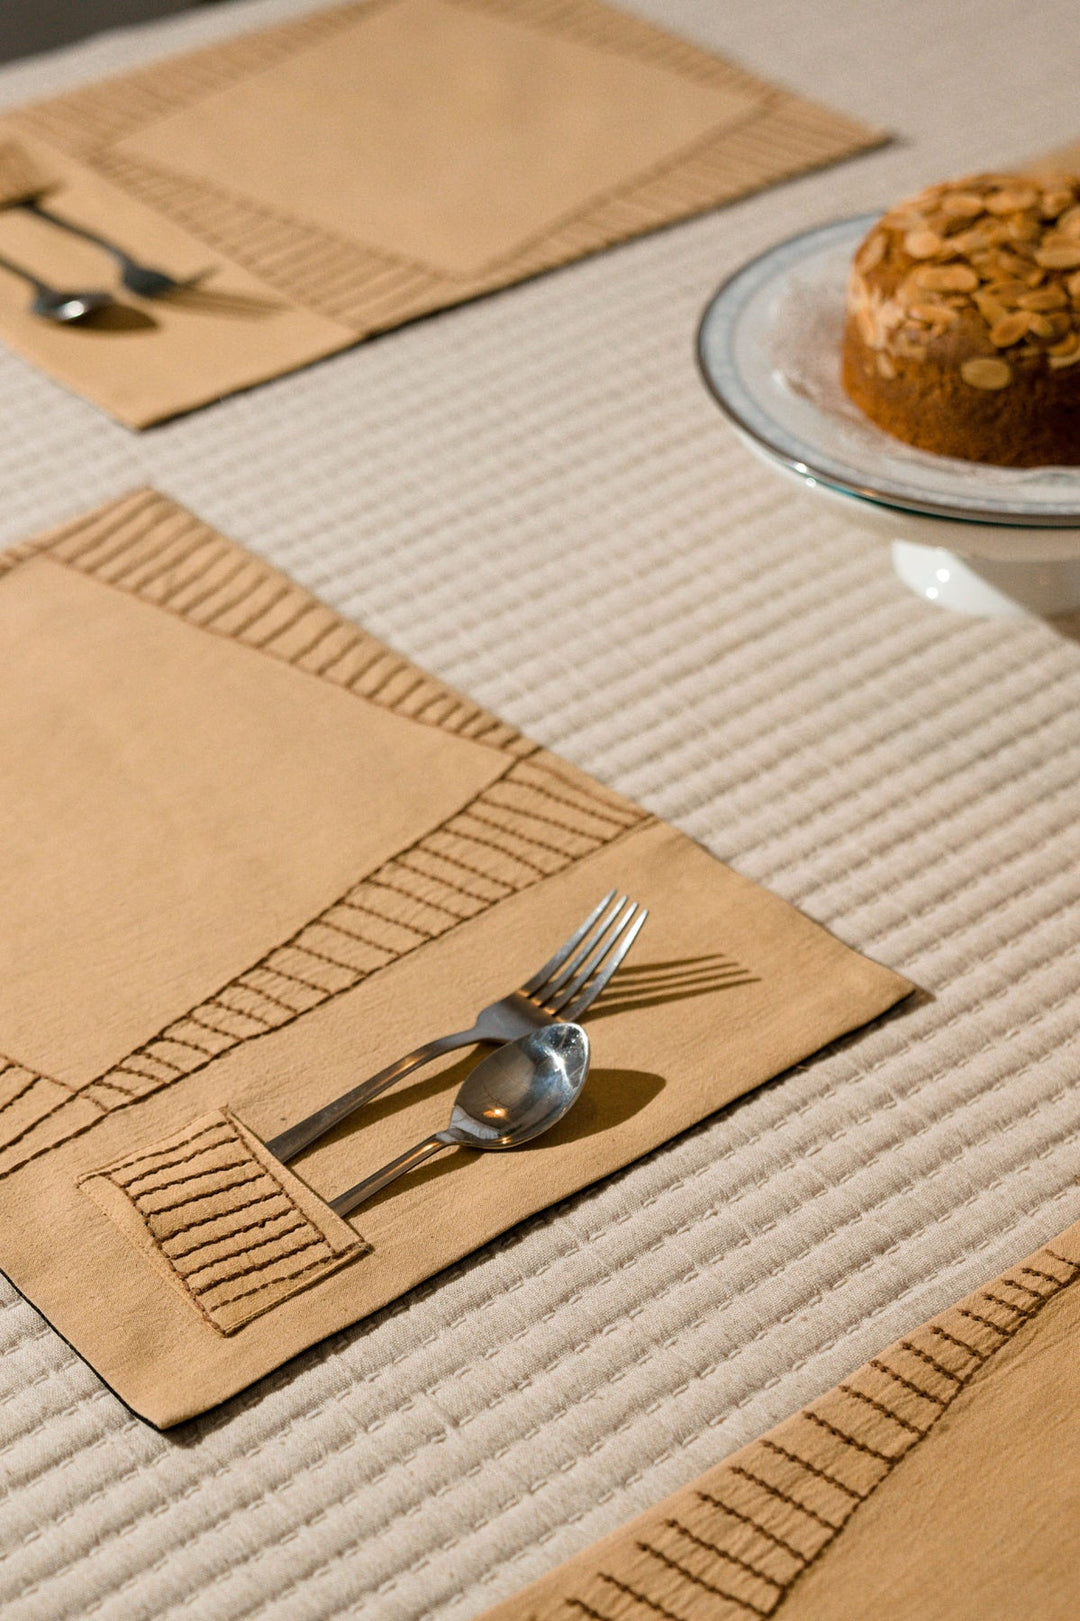 Brown Embroidered Table Mats - Set of 6 | Pegasus Handwoven Table Mats - Set Of 6 Pcs - Brown